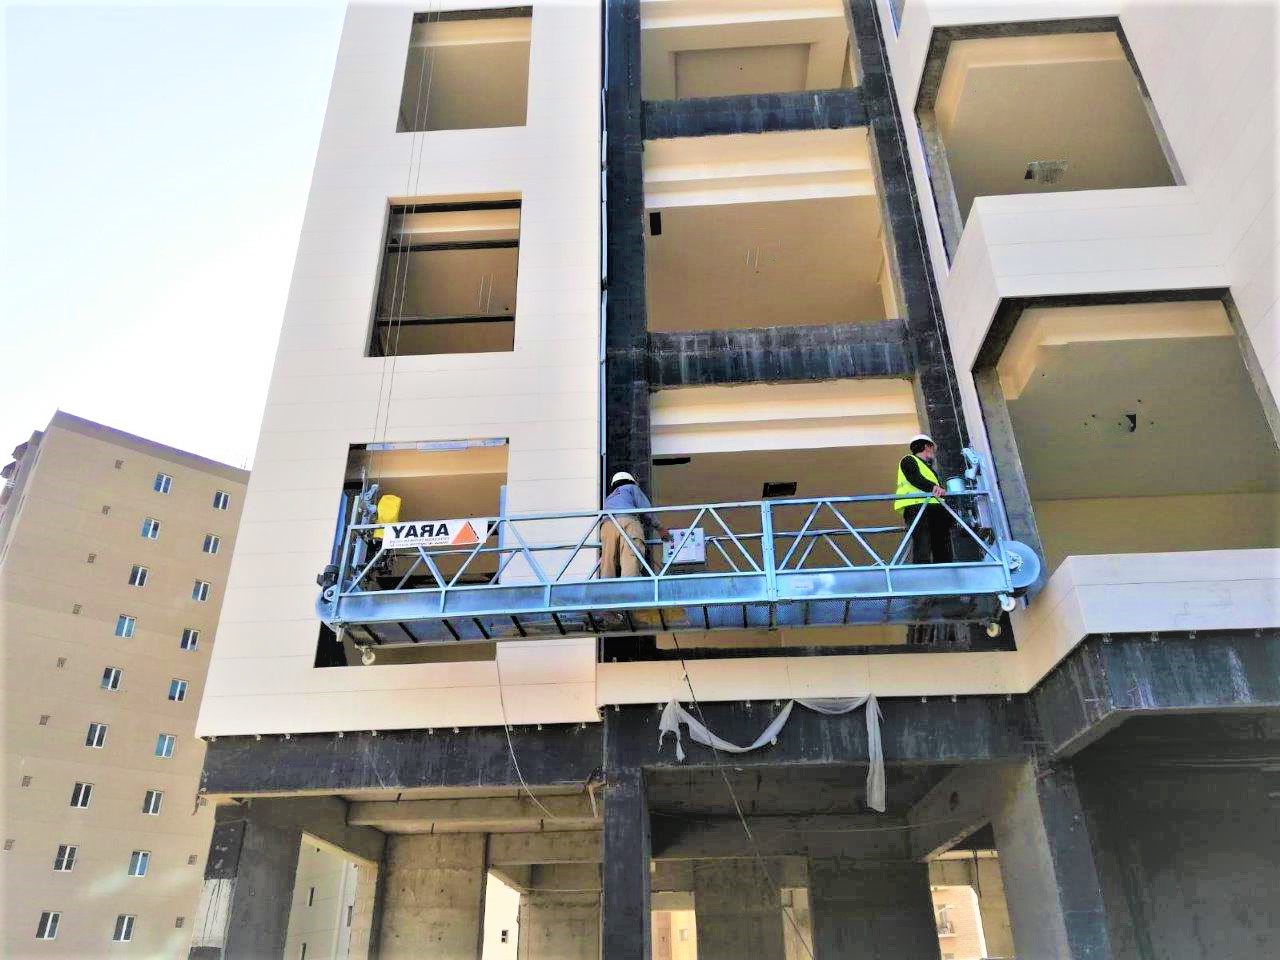 OUR GULF AGENCY IN KUWAIT HAS DELIVERED 5 SET SUSPENDED SCAFFOLDING